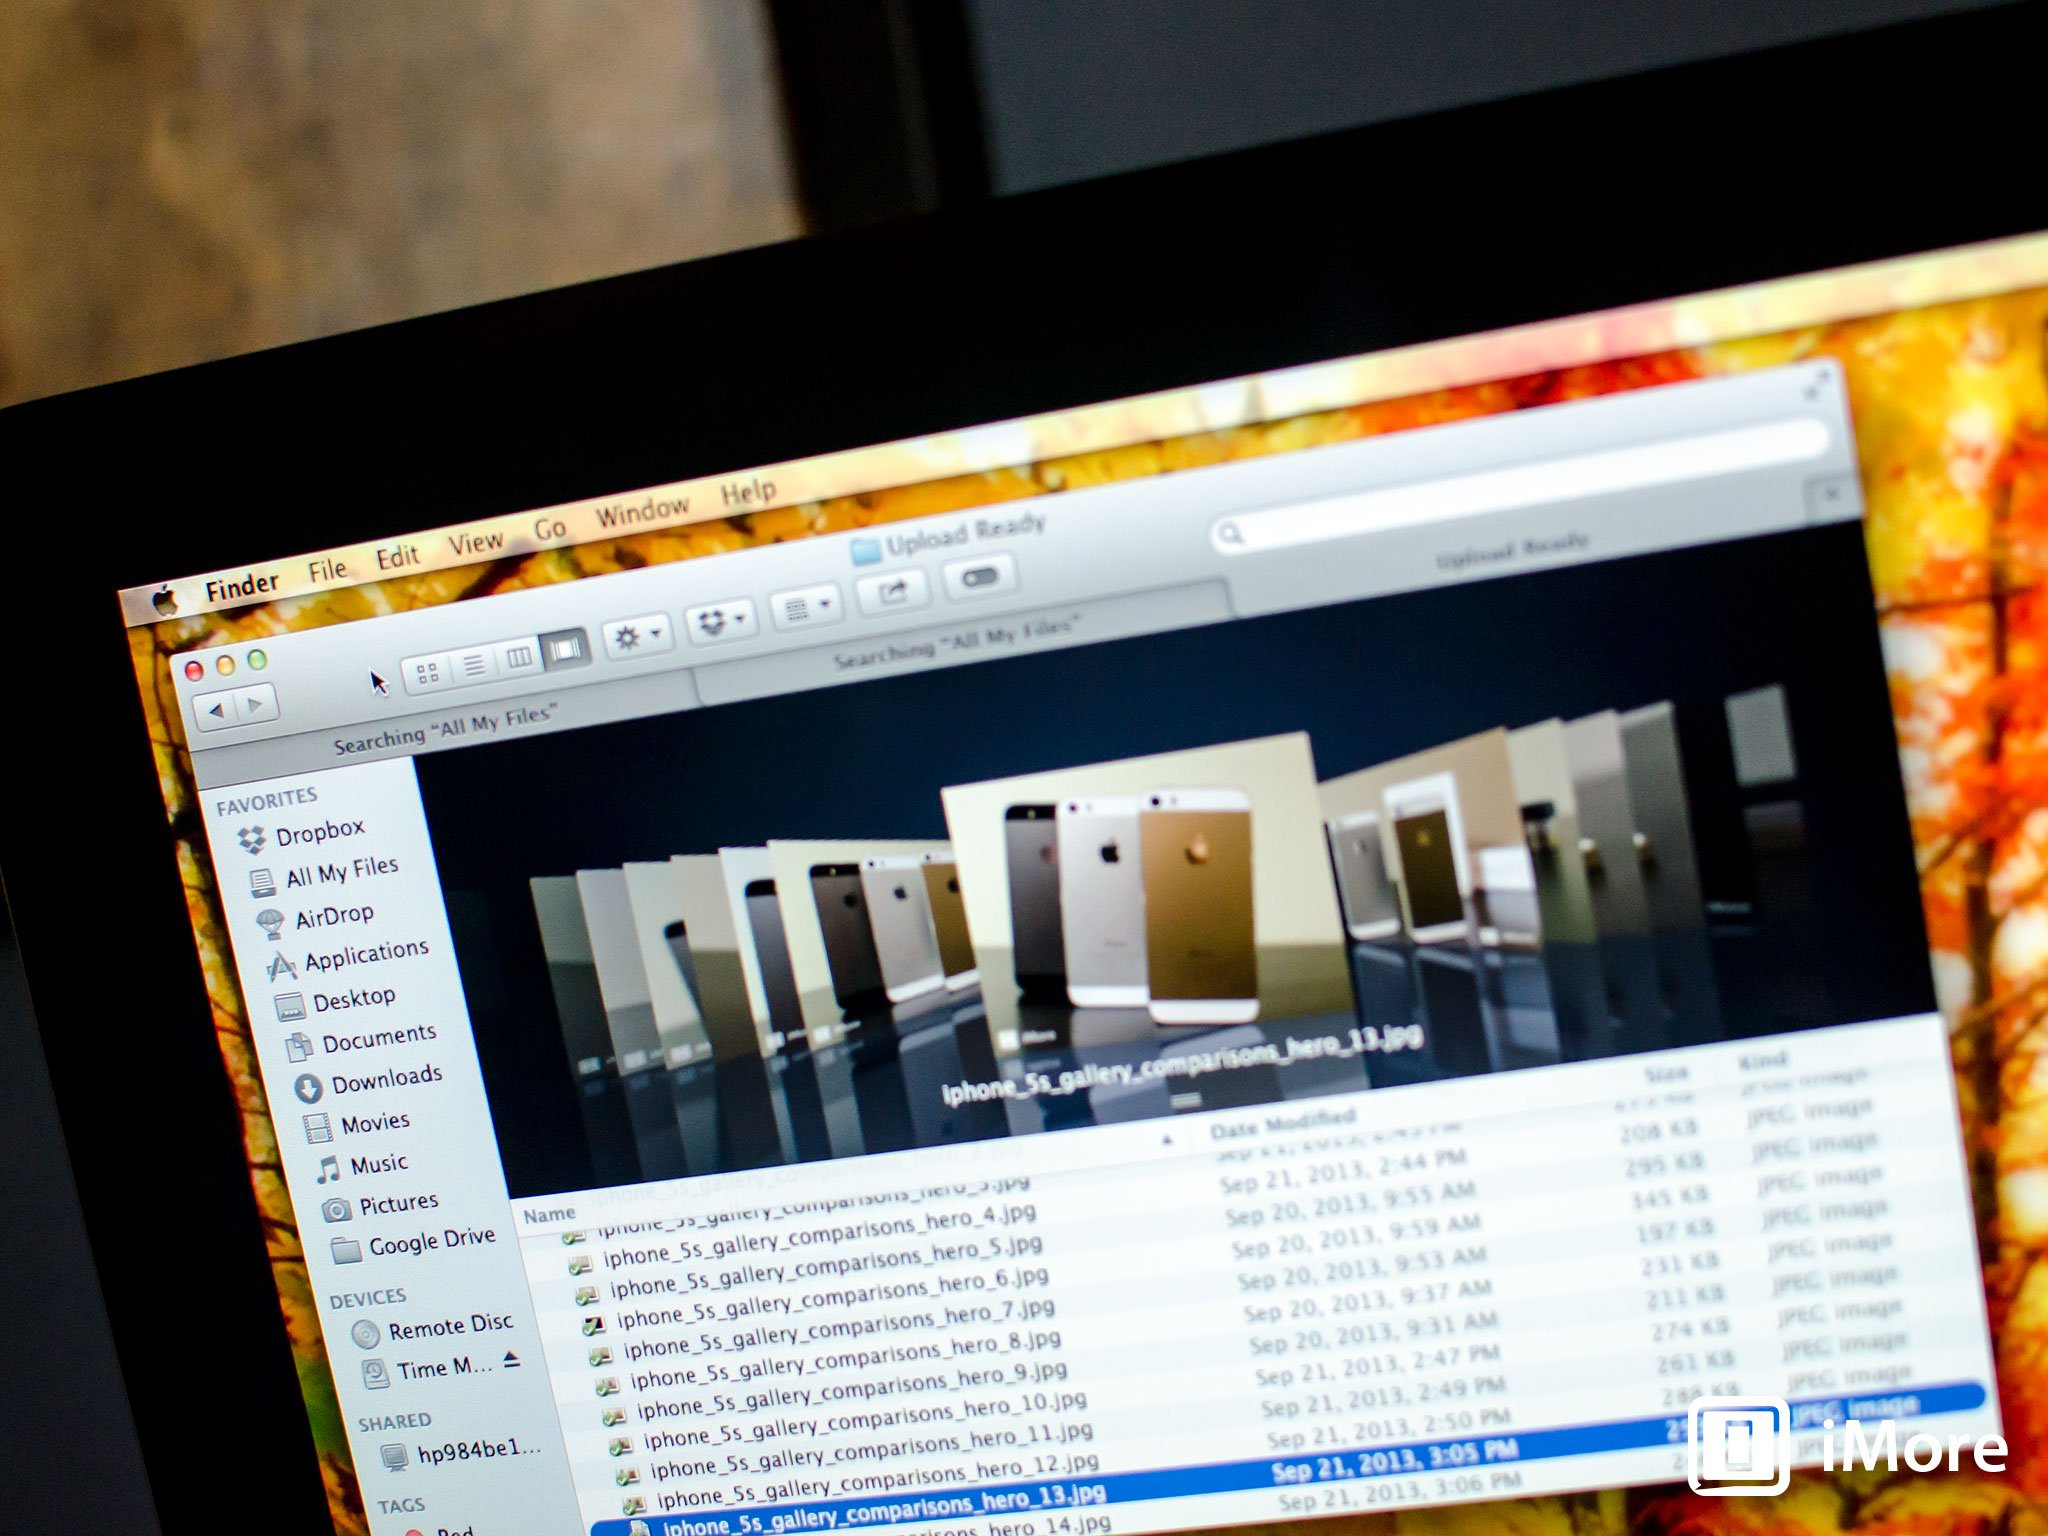 How to open a new Finder Tab in OS X Mavericks